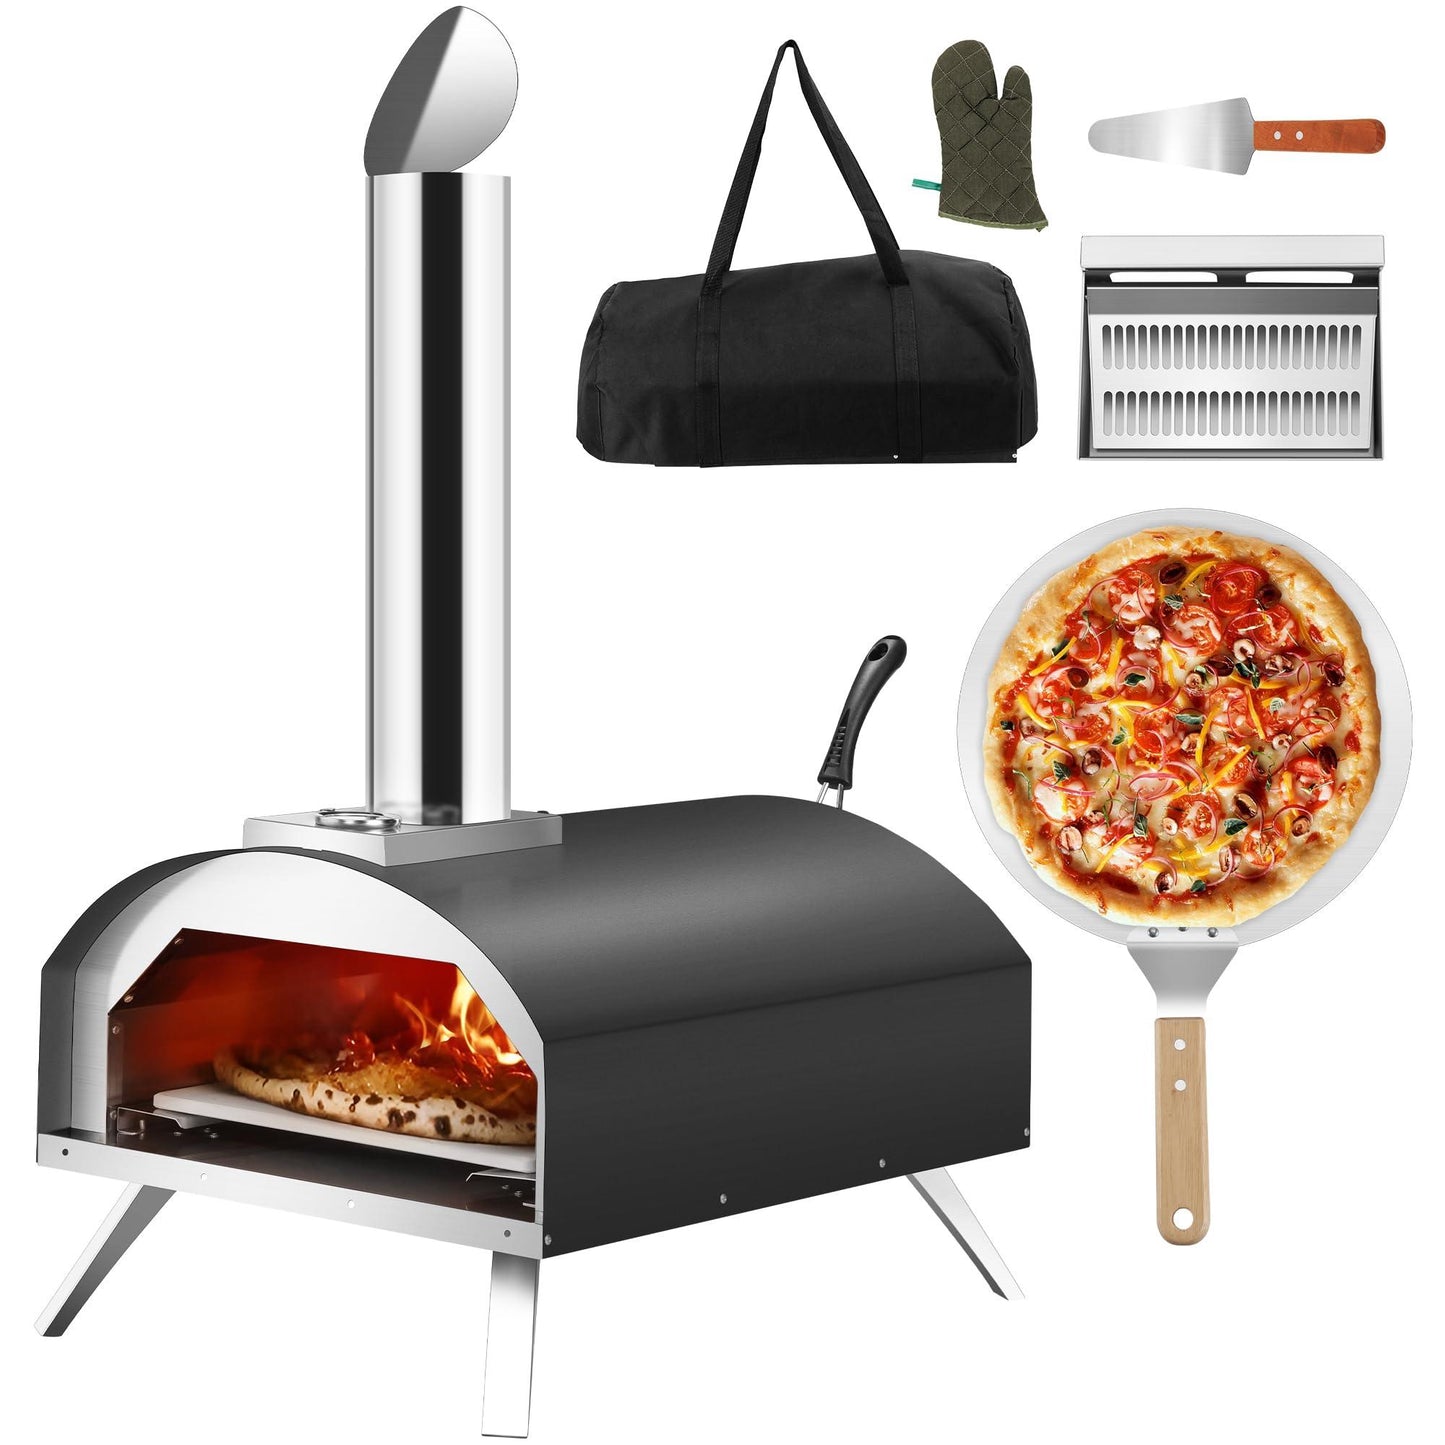 Rengue Outdoor Pizza Oven, 12" Wood Fired Pellet Pizza Ovens Built-in Thermometer, Portable Stainless Steel Cooking Pizza Maker Pizza Oven Countertop for Backyard Outside Camping Picnics - CookCave